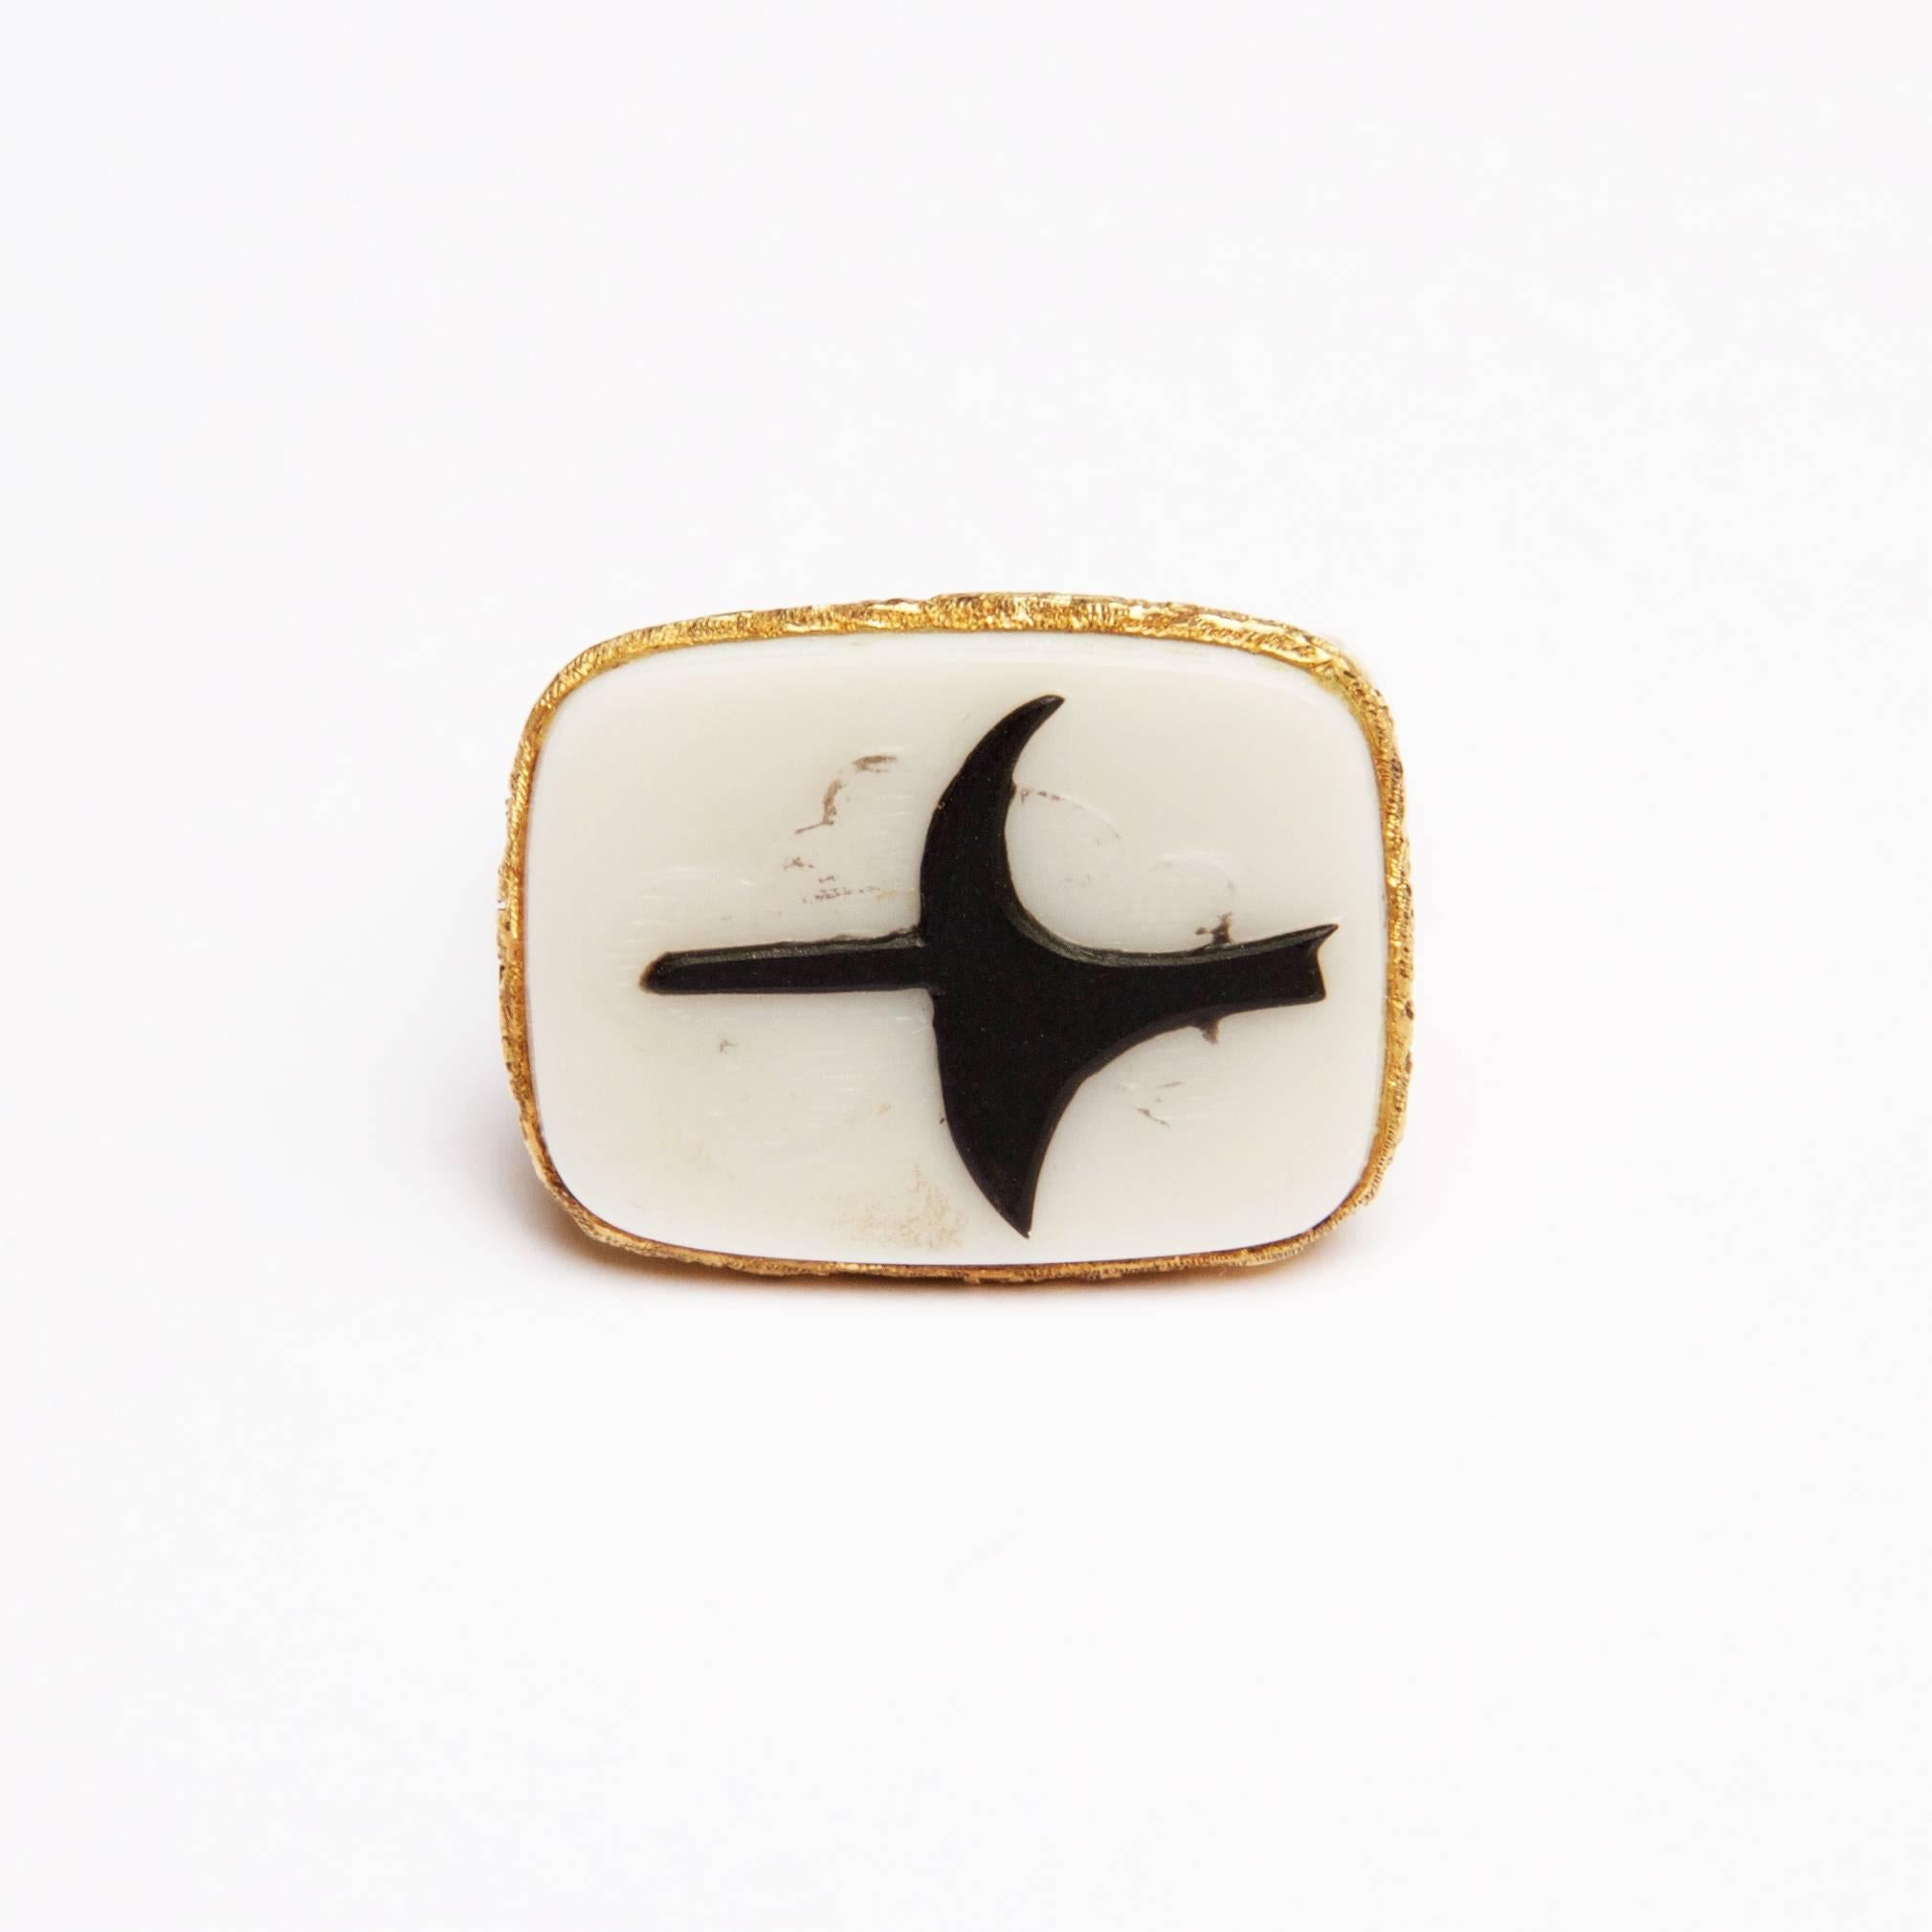 Very Rare 18K gold (marked), Onyx and White Agate cameo ring by Georges Braque (1882-1963), inventor of cubism.
This ring was manufactured by Heger de Loewenfeld after the gouache eos in 1963 in only one exemplar.

It is Signed 